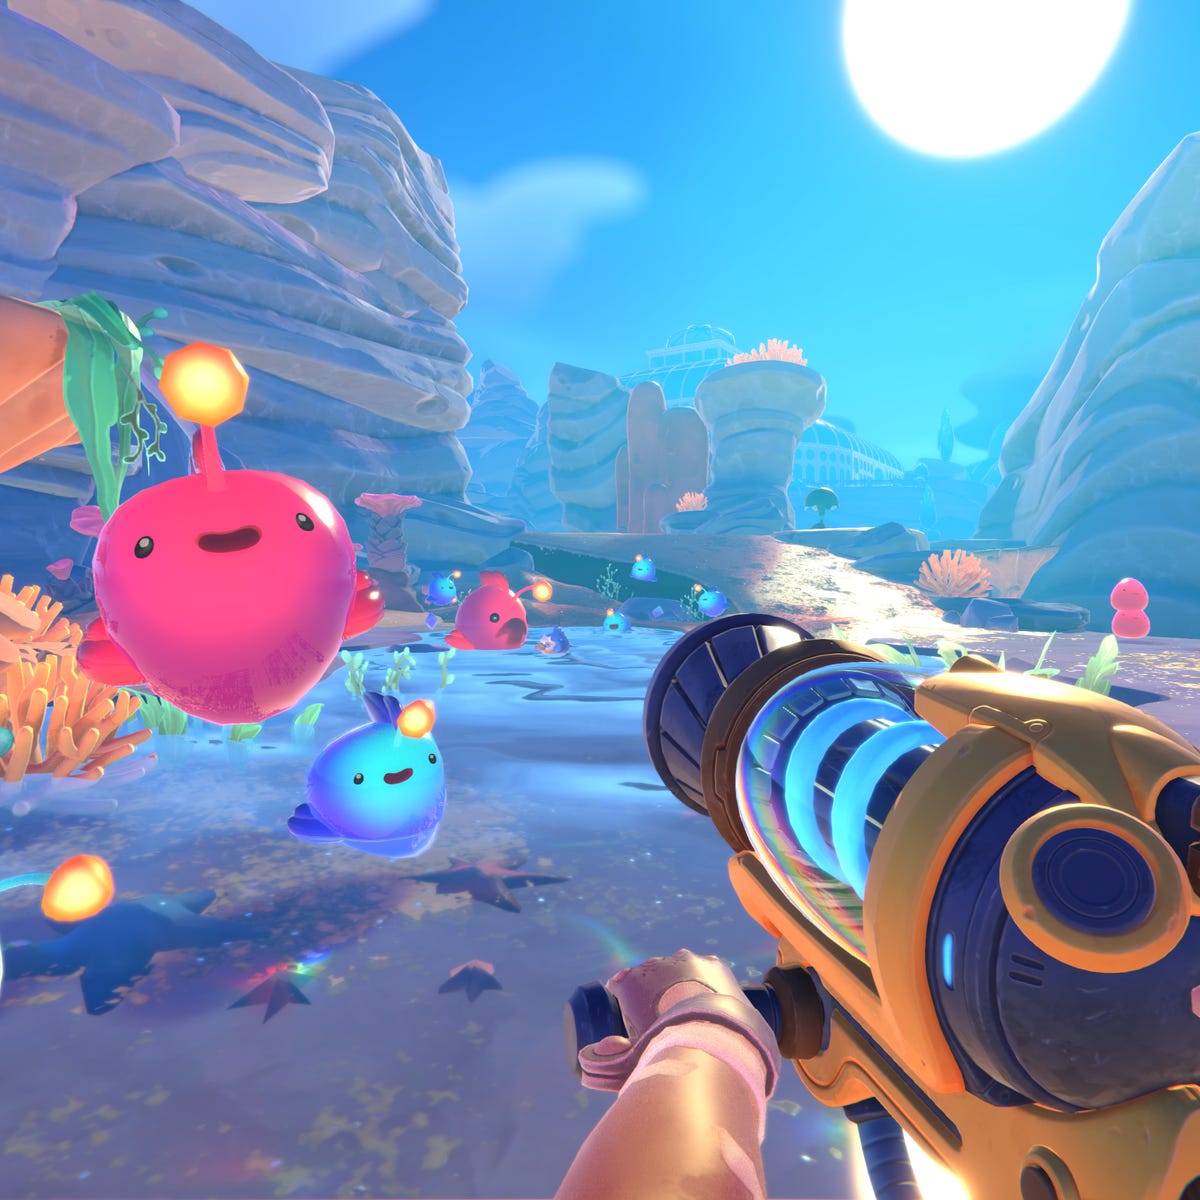 Slime Rancher 2 Finally Shares 2022 Release Date, Drops Preview